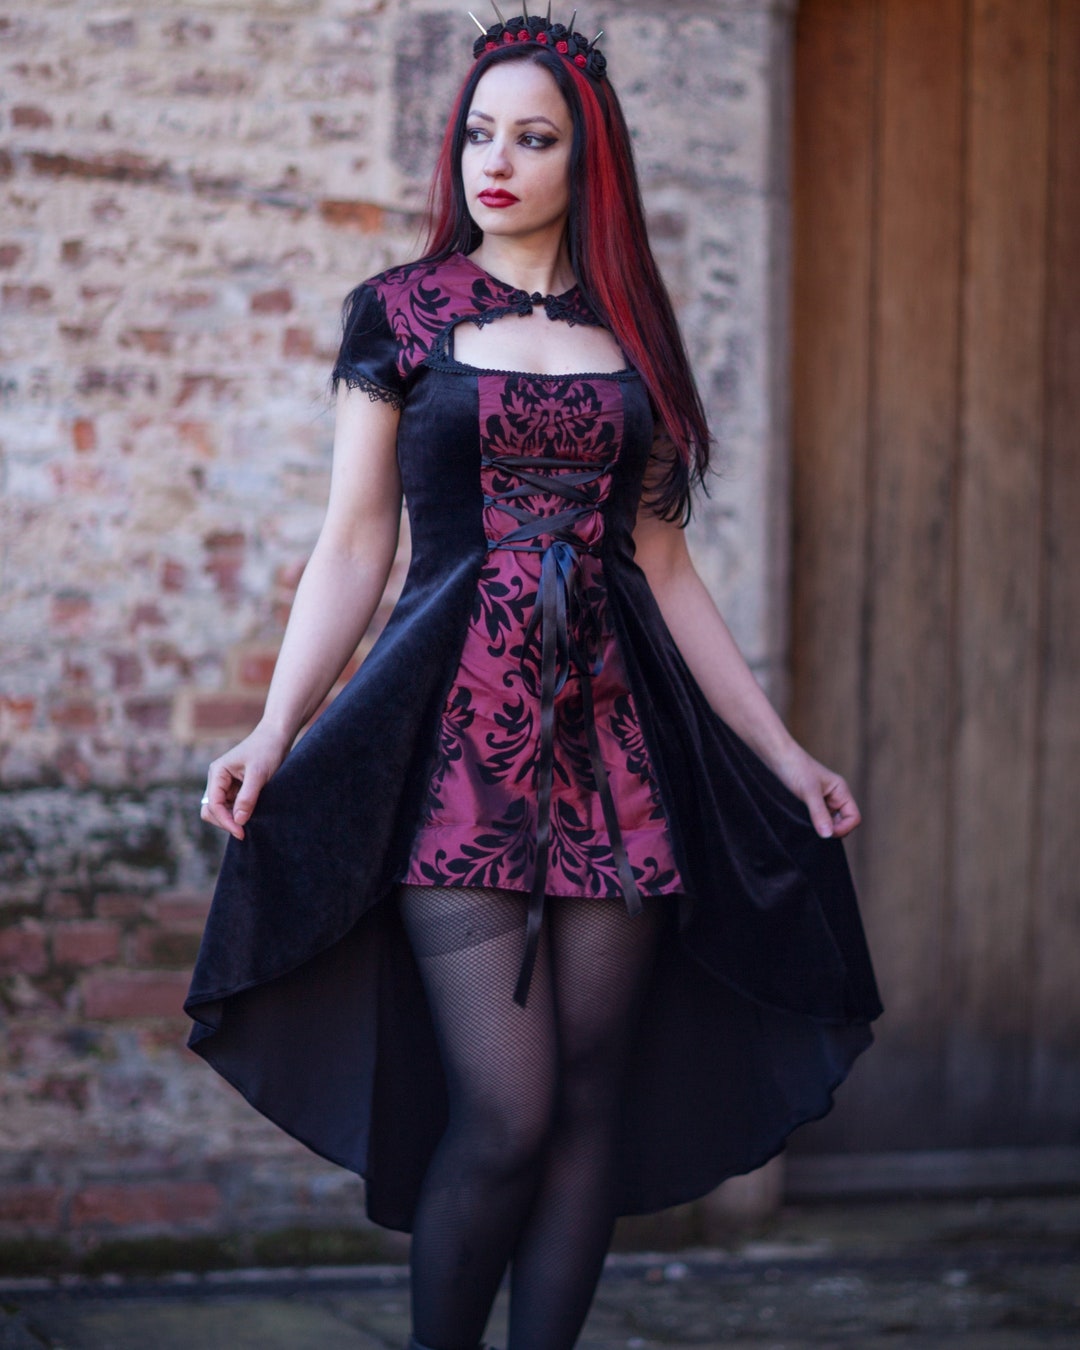 The Gothic Shop - Model/Photo: Daedra Red Eyed Spider Dress:  https://www.the-gothic-shop.co.uk/eyed-spider-gothic-dress-punk-rave-p-10618.html  | Facebook